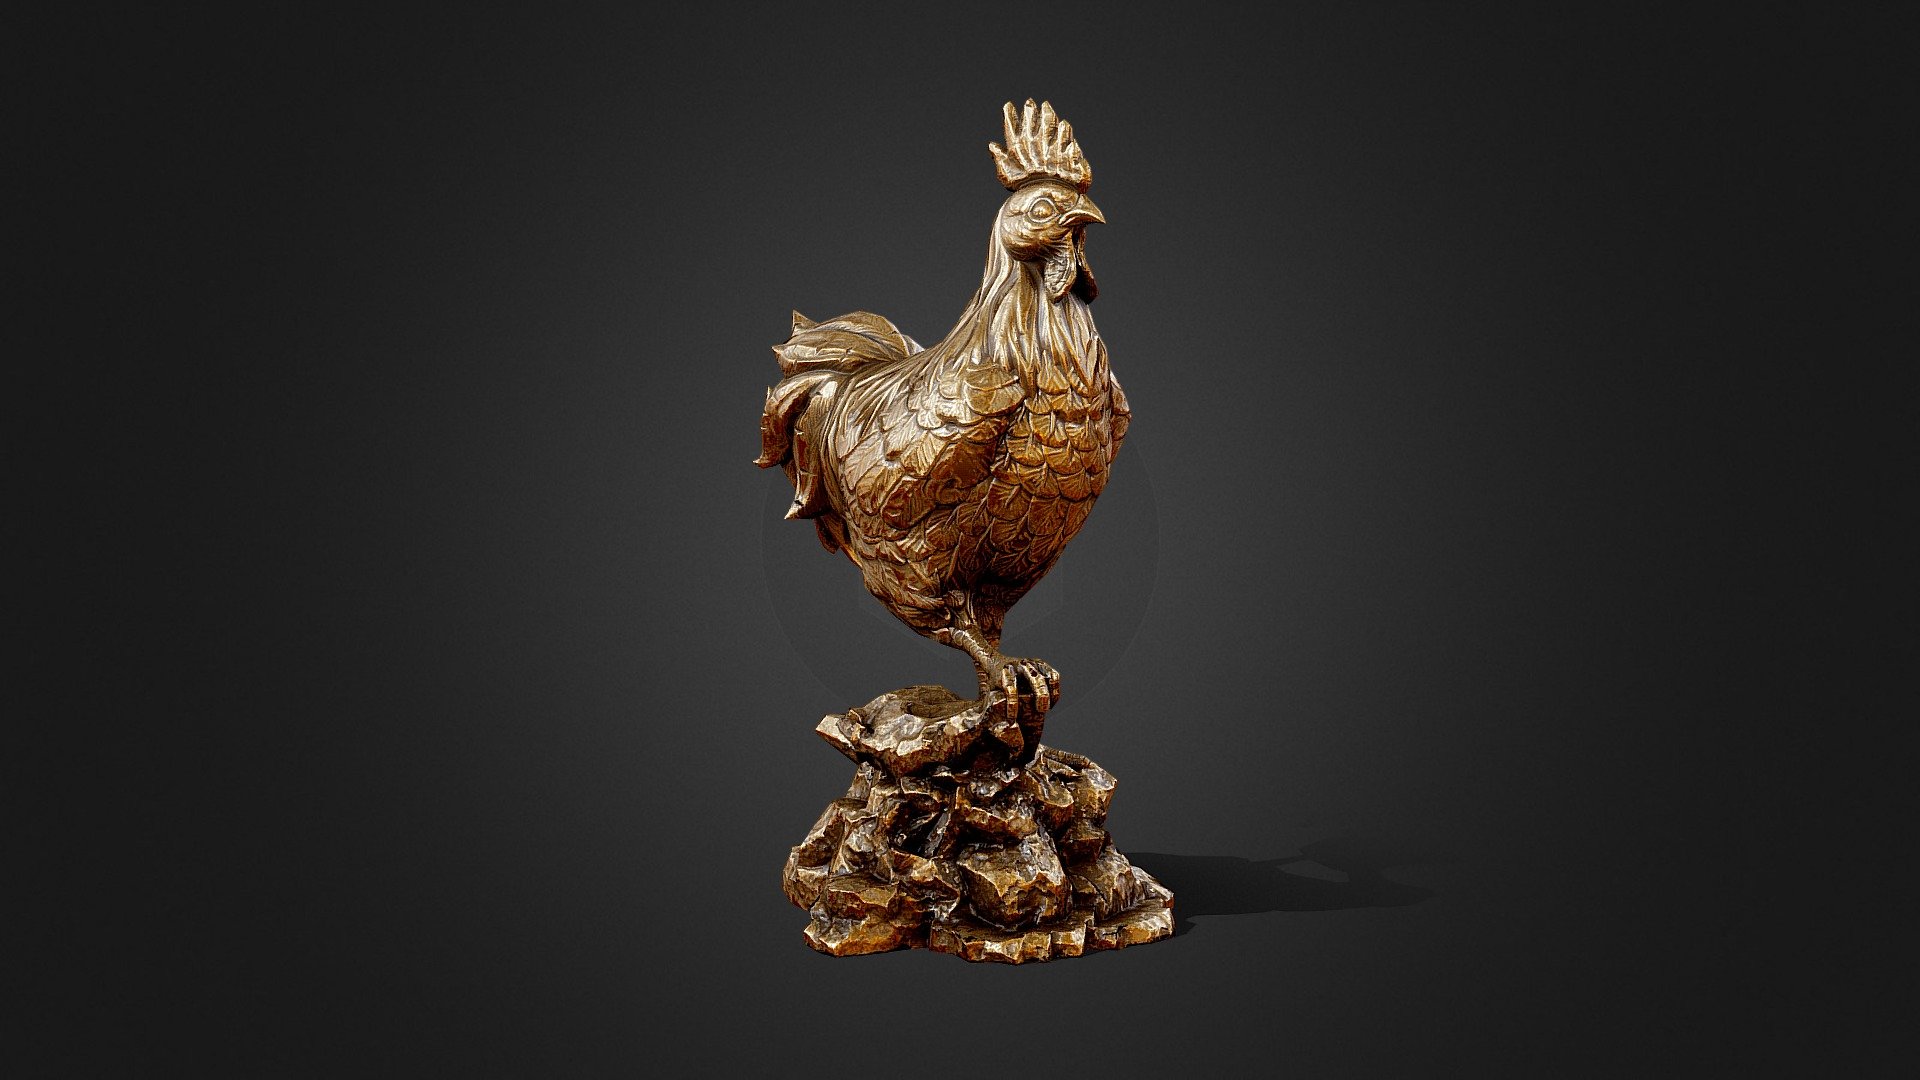 this rooster is my environment's prop for portfolio~:)

I used Zbrush(sculpting), 3dsmax(make topology), substance painter(texturing) - Rooster Sculpture - 3D model by Binho Jeong (@binhoj) 3d model